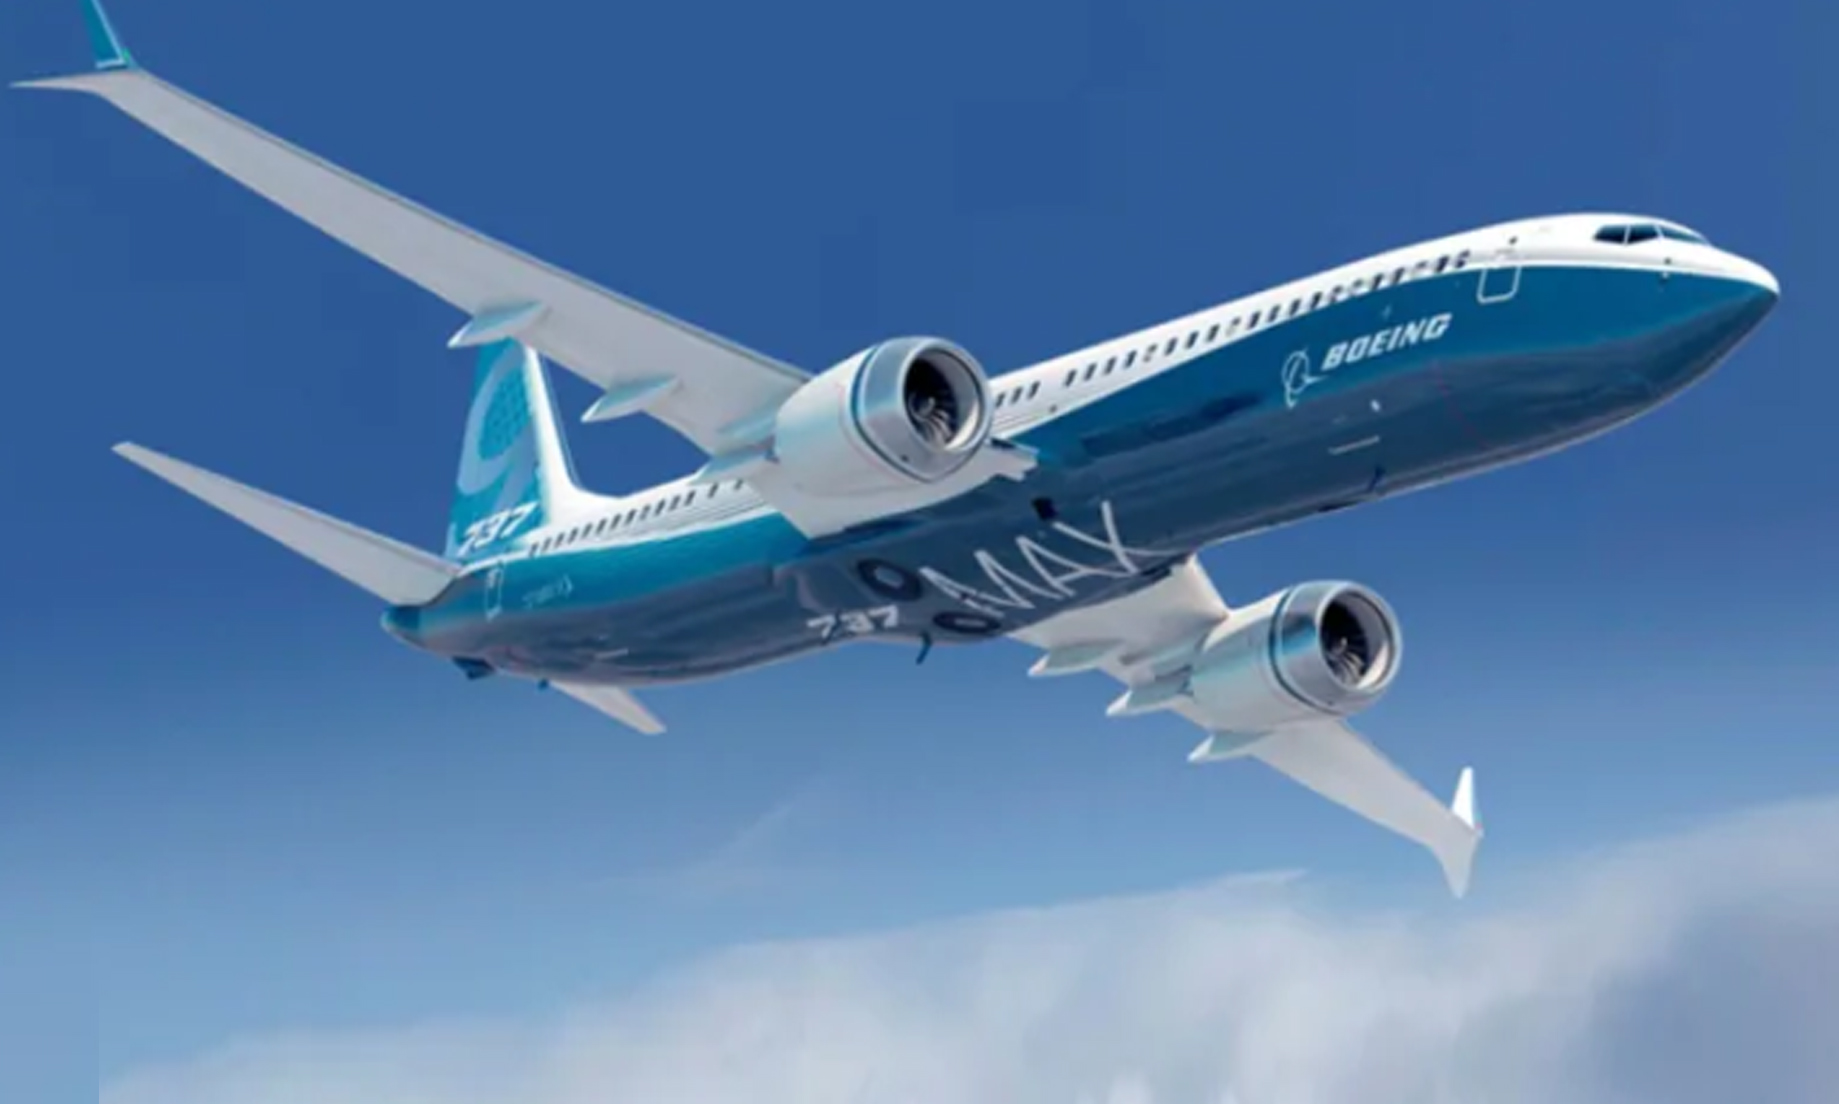 Boeing defends ‘fundamental safety’ of 737 MAX after crash report